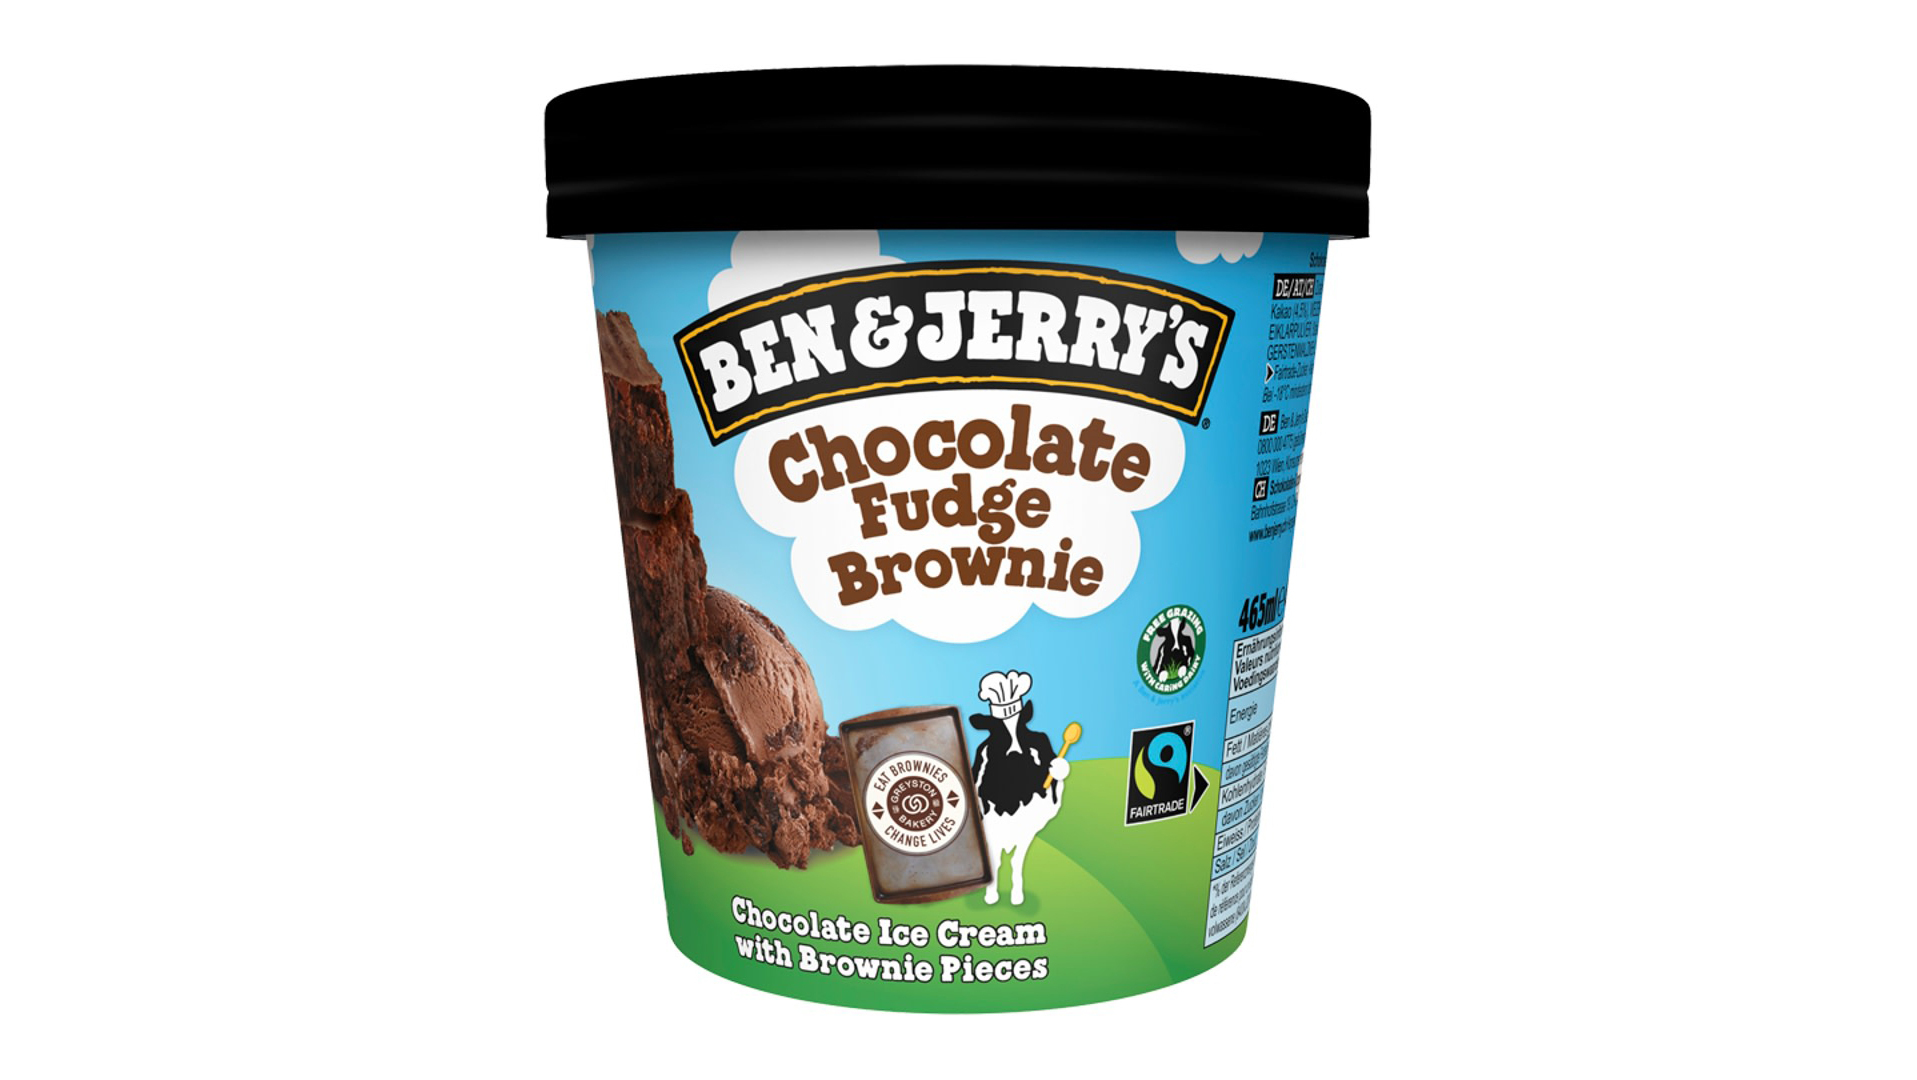 Ben & Jerry's Chocolate Fudge Brownie 500ml - Pizza Collection in Cann Hall E11